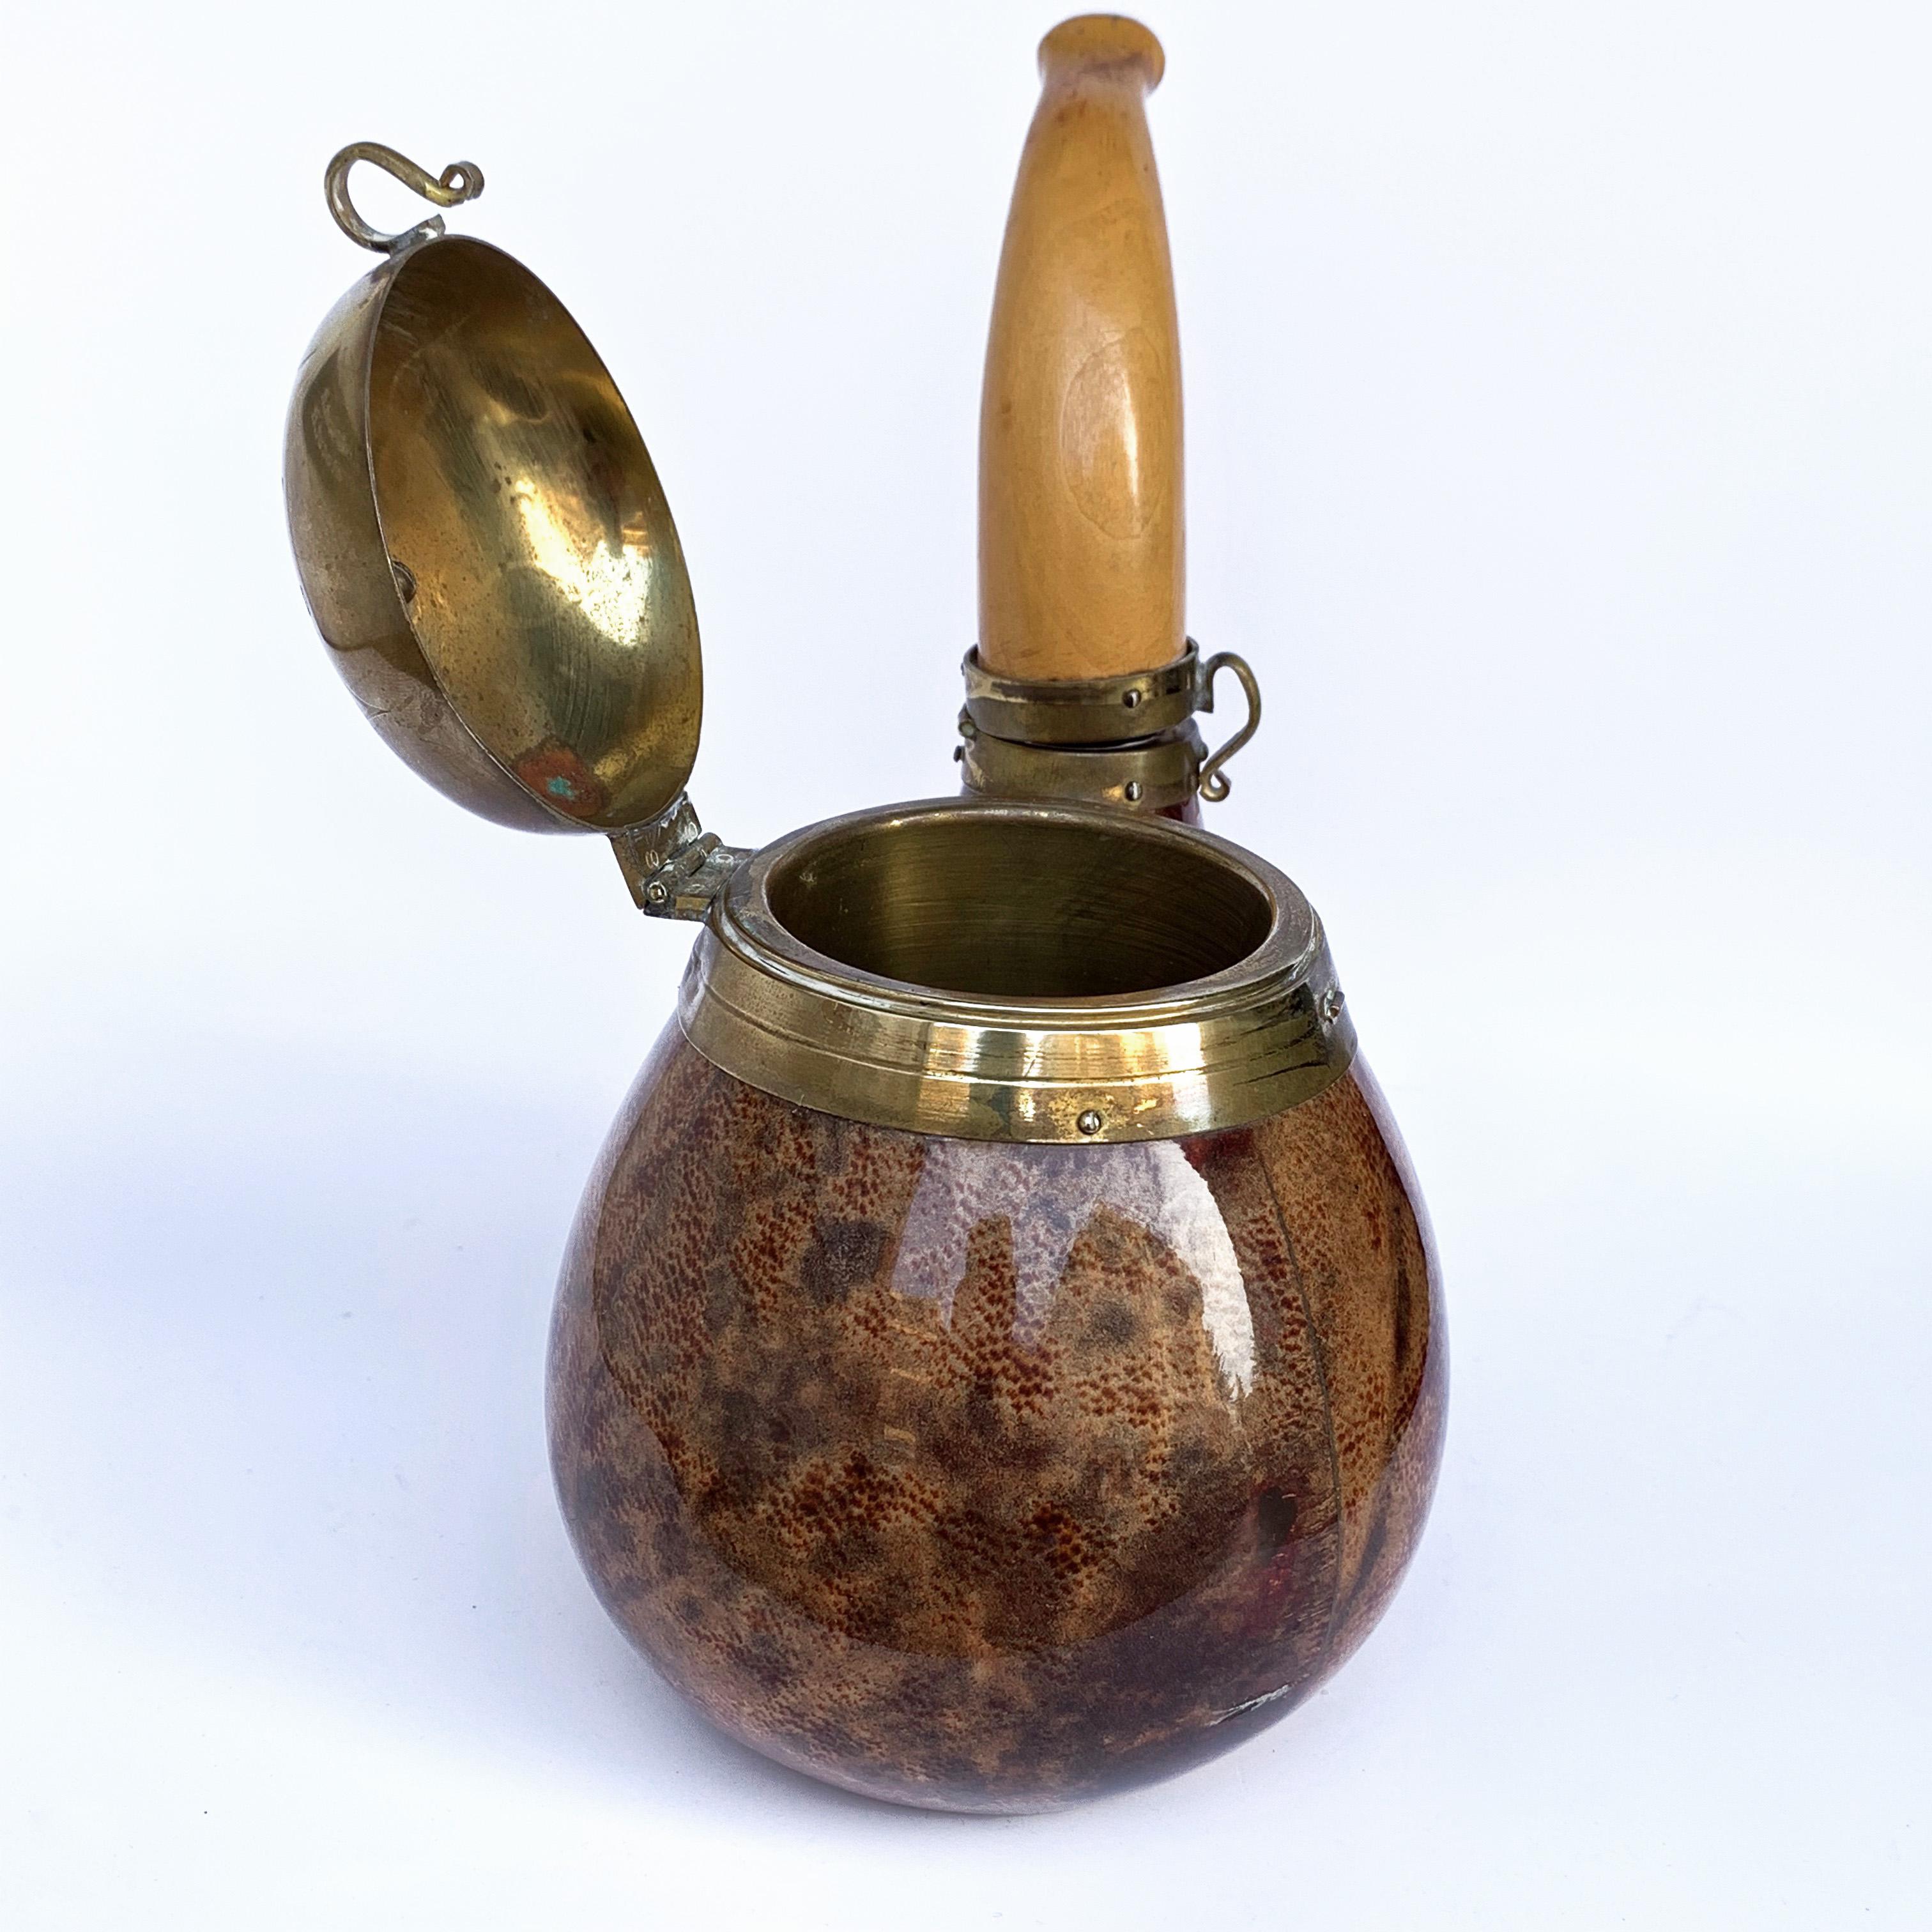 Tobacco container by Aldo Tura, Italy 1940s in goatskin, brass and wood. The container has two compartments, one for storing tobacco and another for storing and lighting the games. Designed by Aldo Tura, Italy for Macabo, Cusano Milanino.